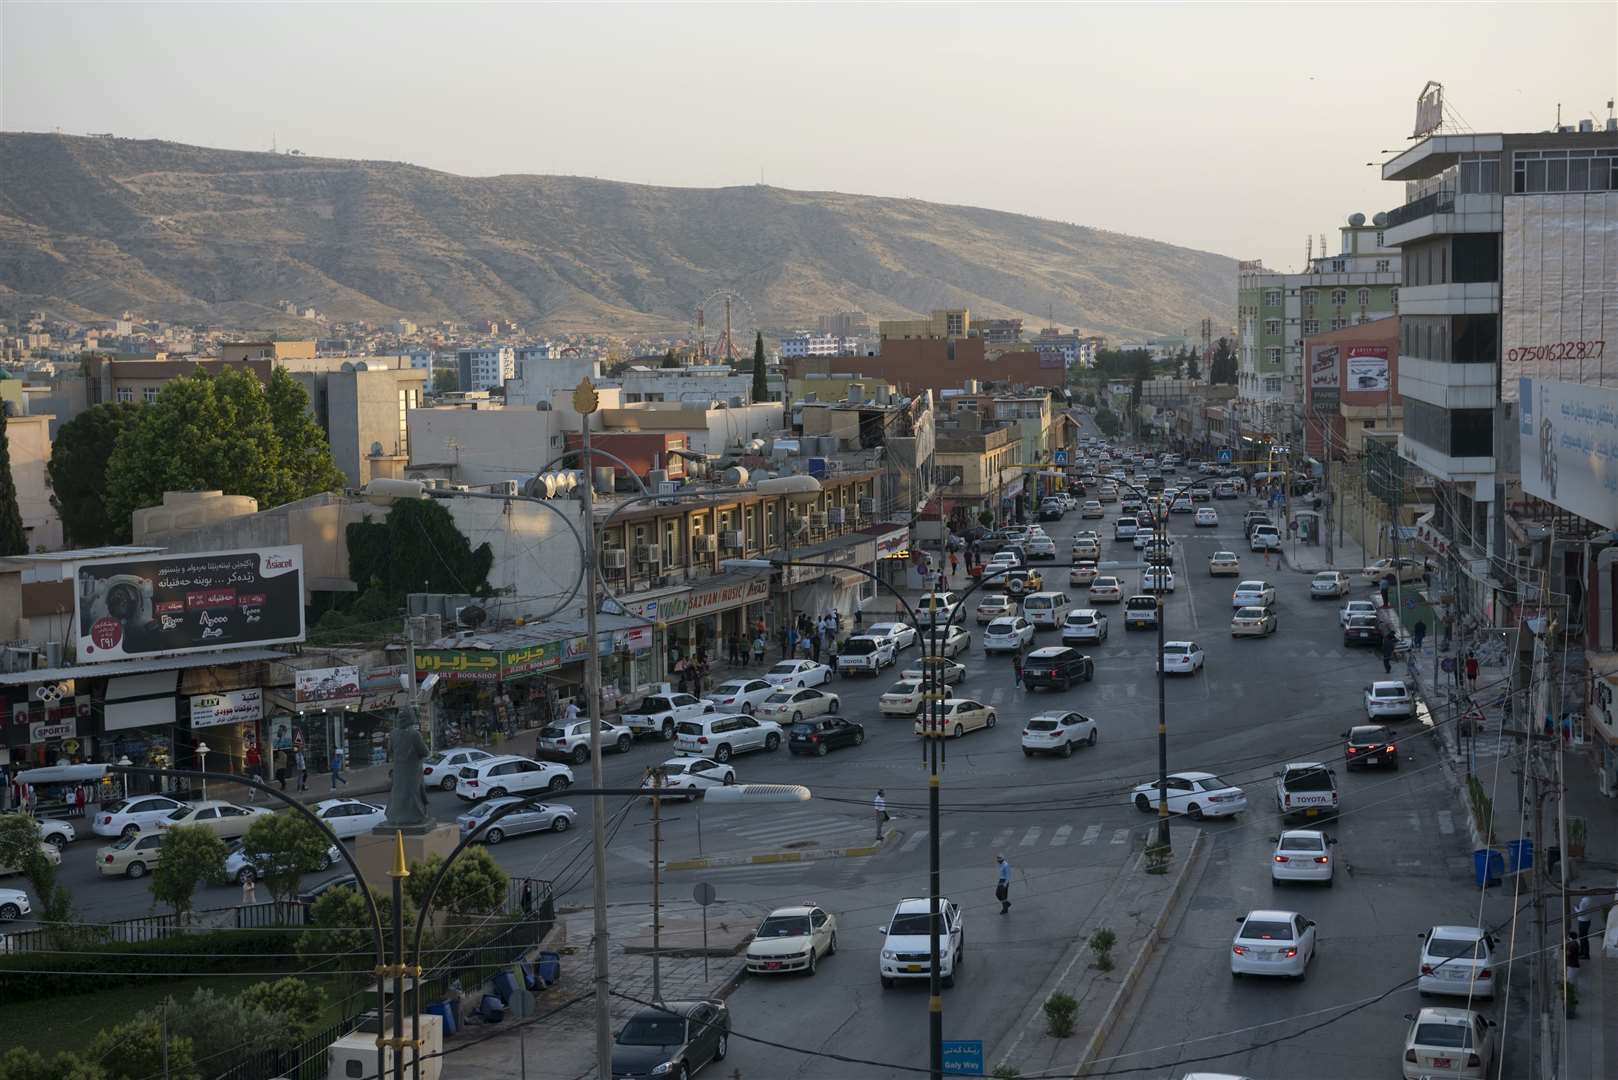 Dohuk, a Kurdish city in northern Iraq (May 28, 2017). Picture: iStock/Joel Carillet